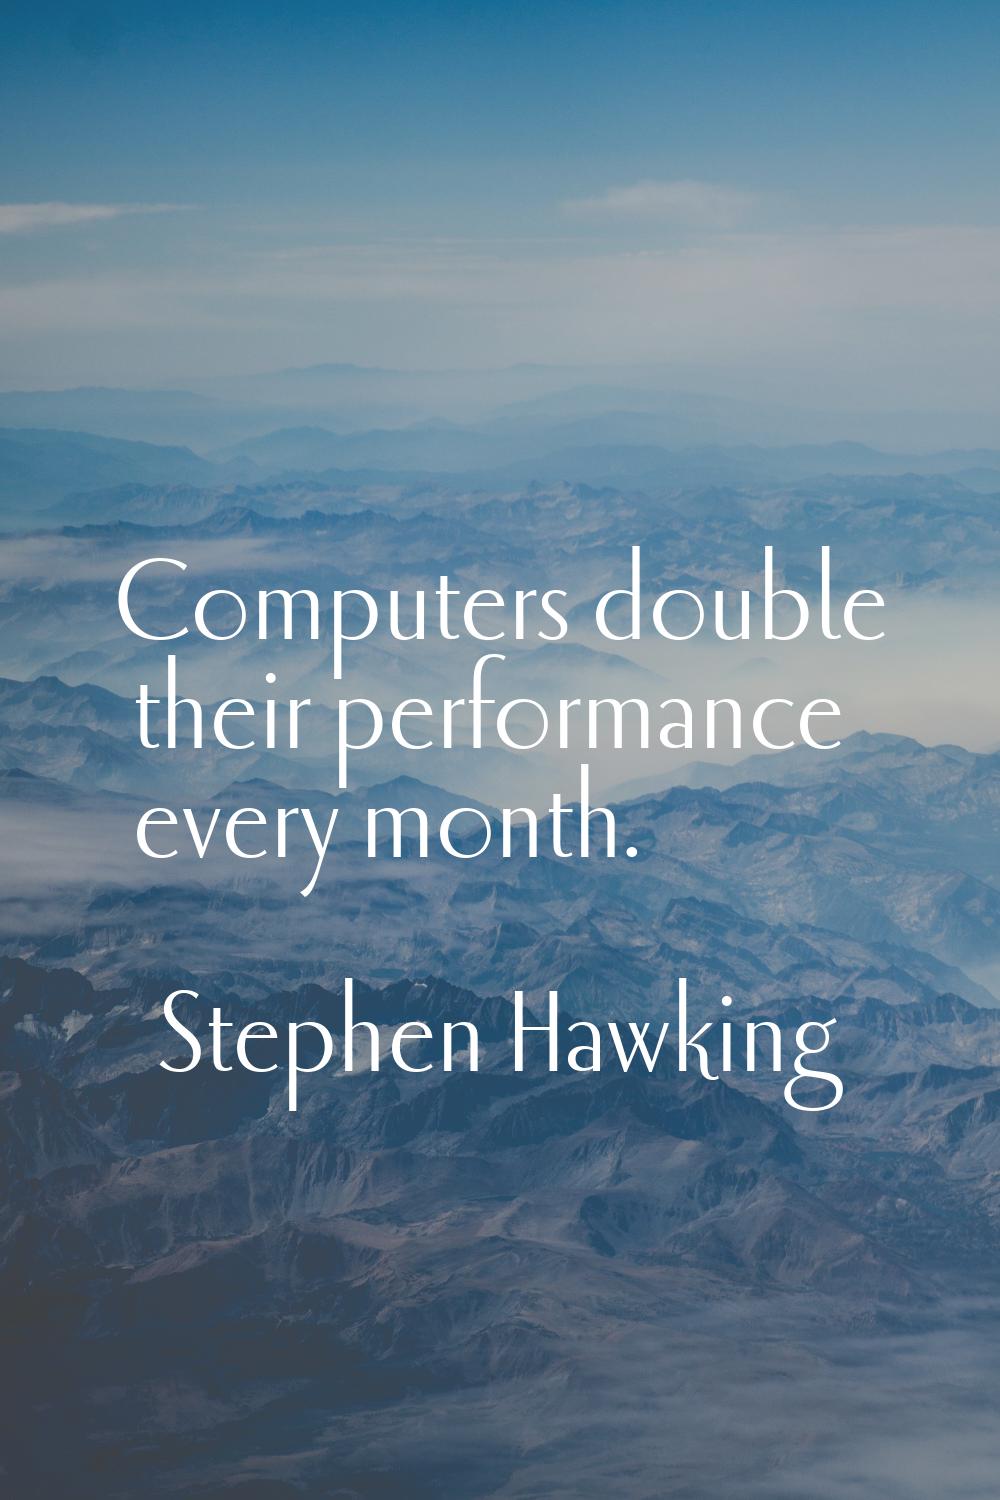 Computers double their performance every month.